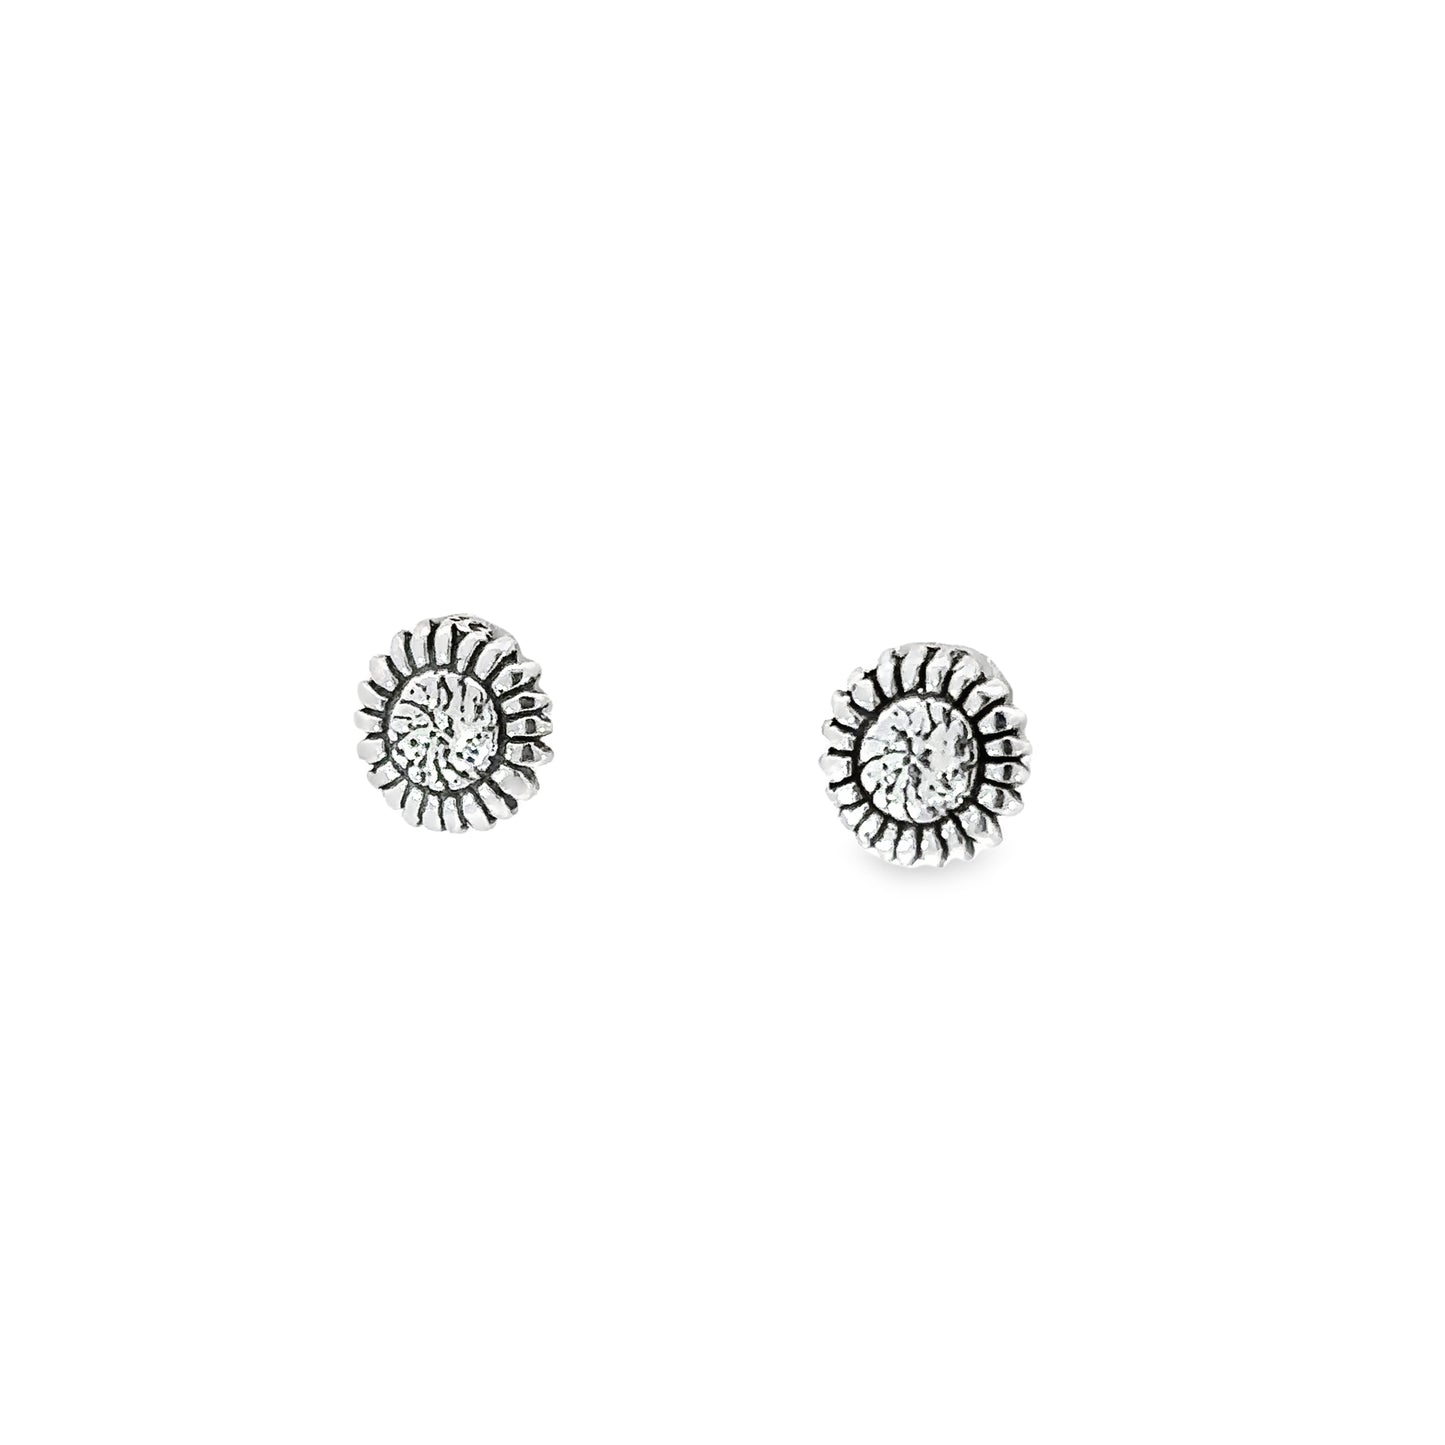 A small addition to your everyday casual look, these Sunflower Studs are perfect for adding a touch of elegance.